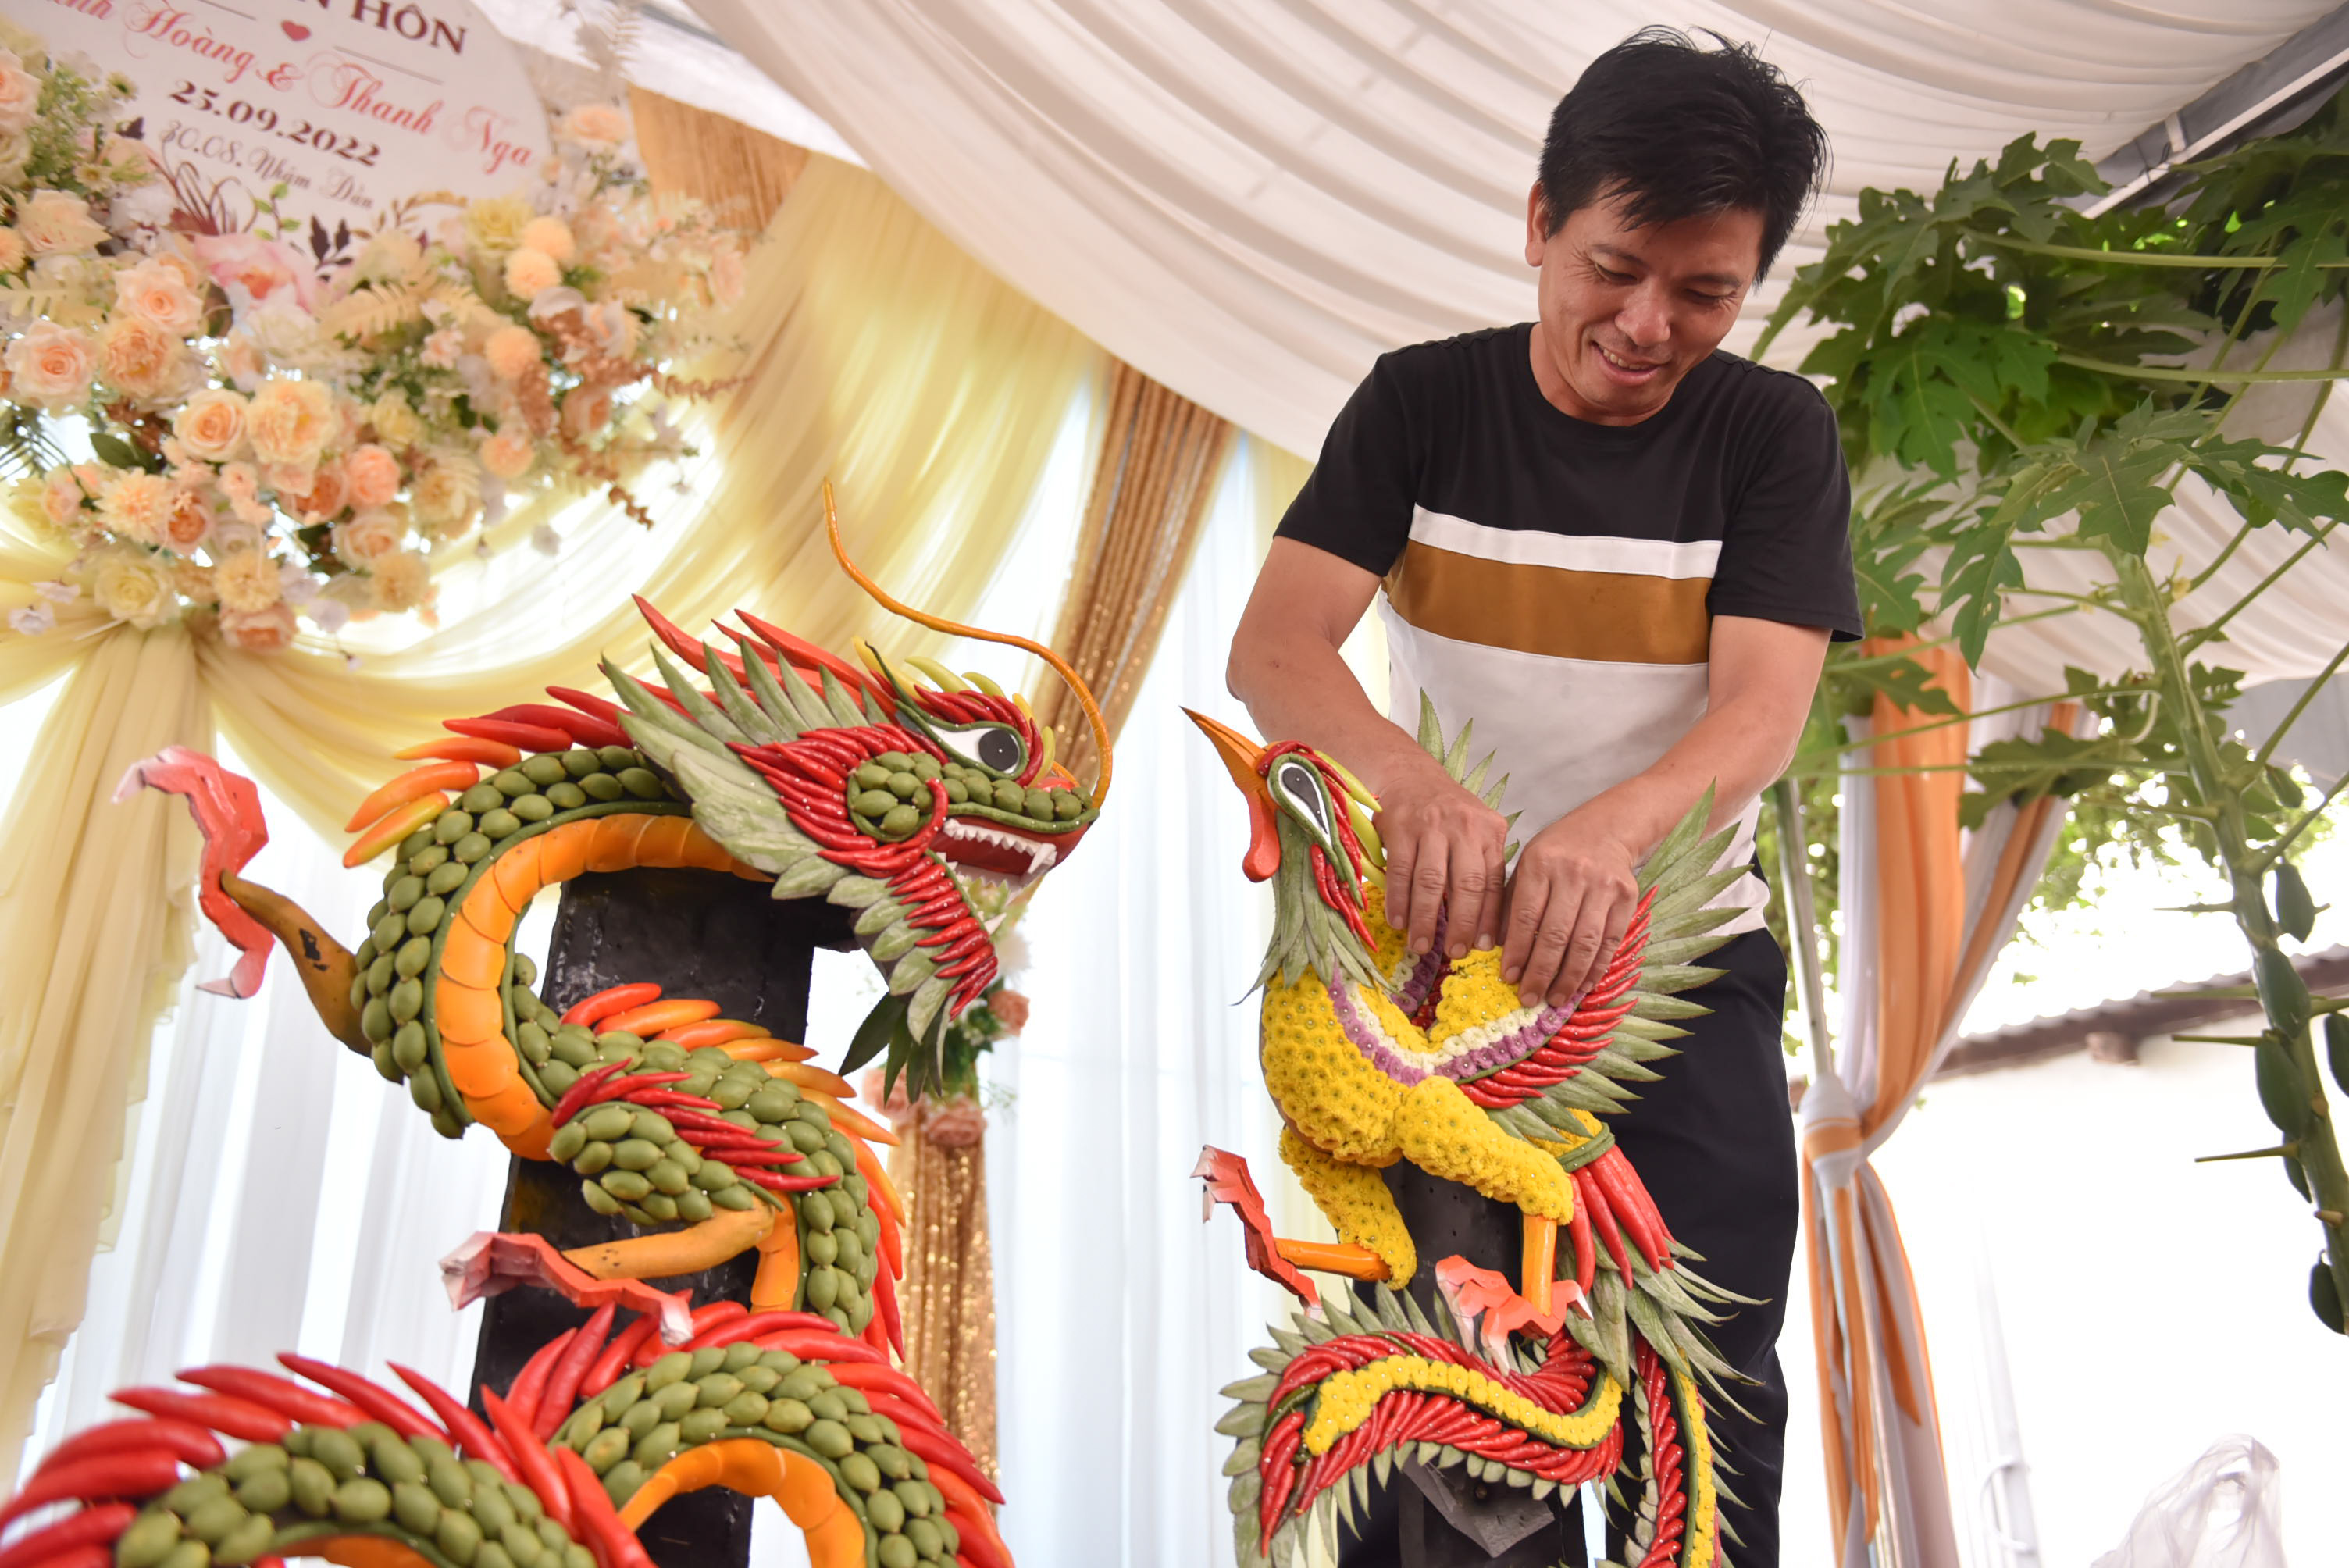 Tran Trung Hieu from the southern province of Dong Nai has been making veggie wedding gates for the past ten years. Photo: Ngoc Phuong / Tuoi Tre News